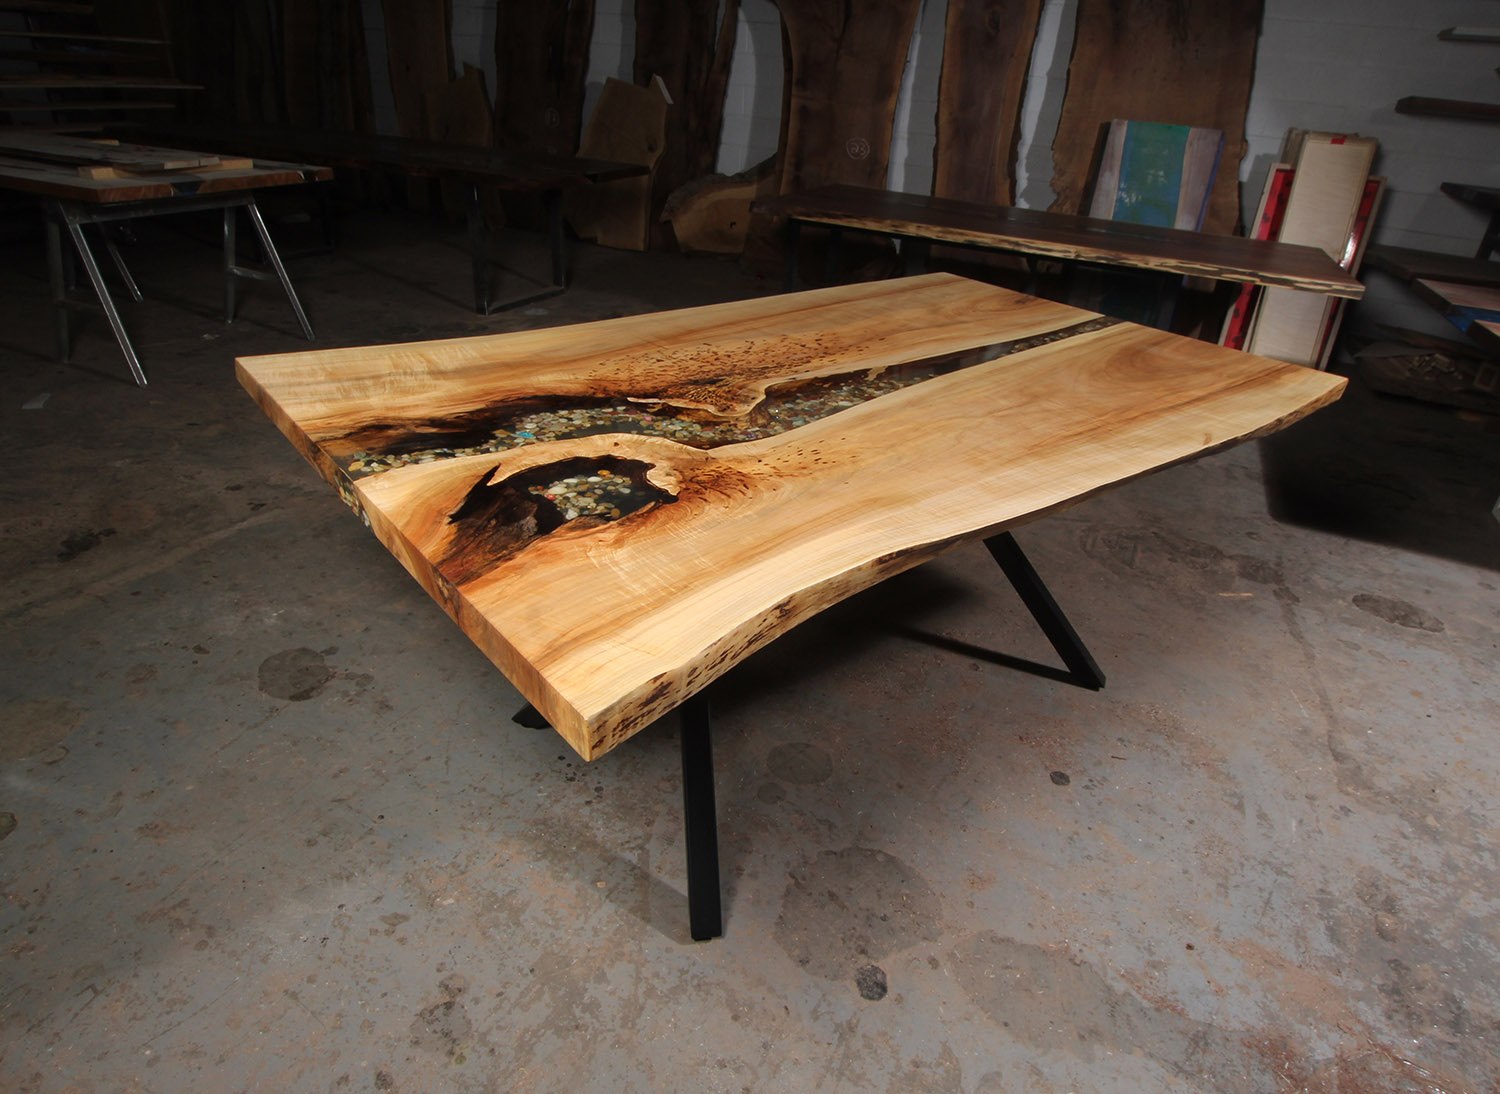 Maple Kitchen River Table with K shaped Legs